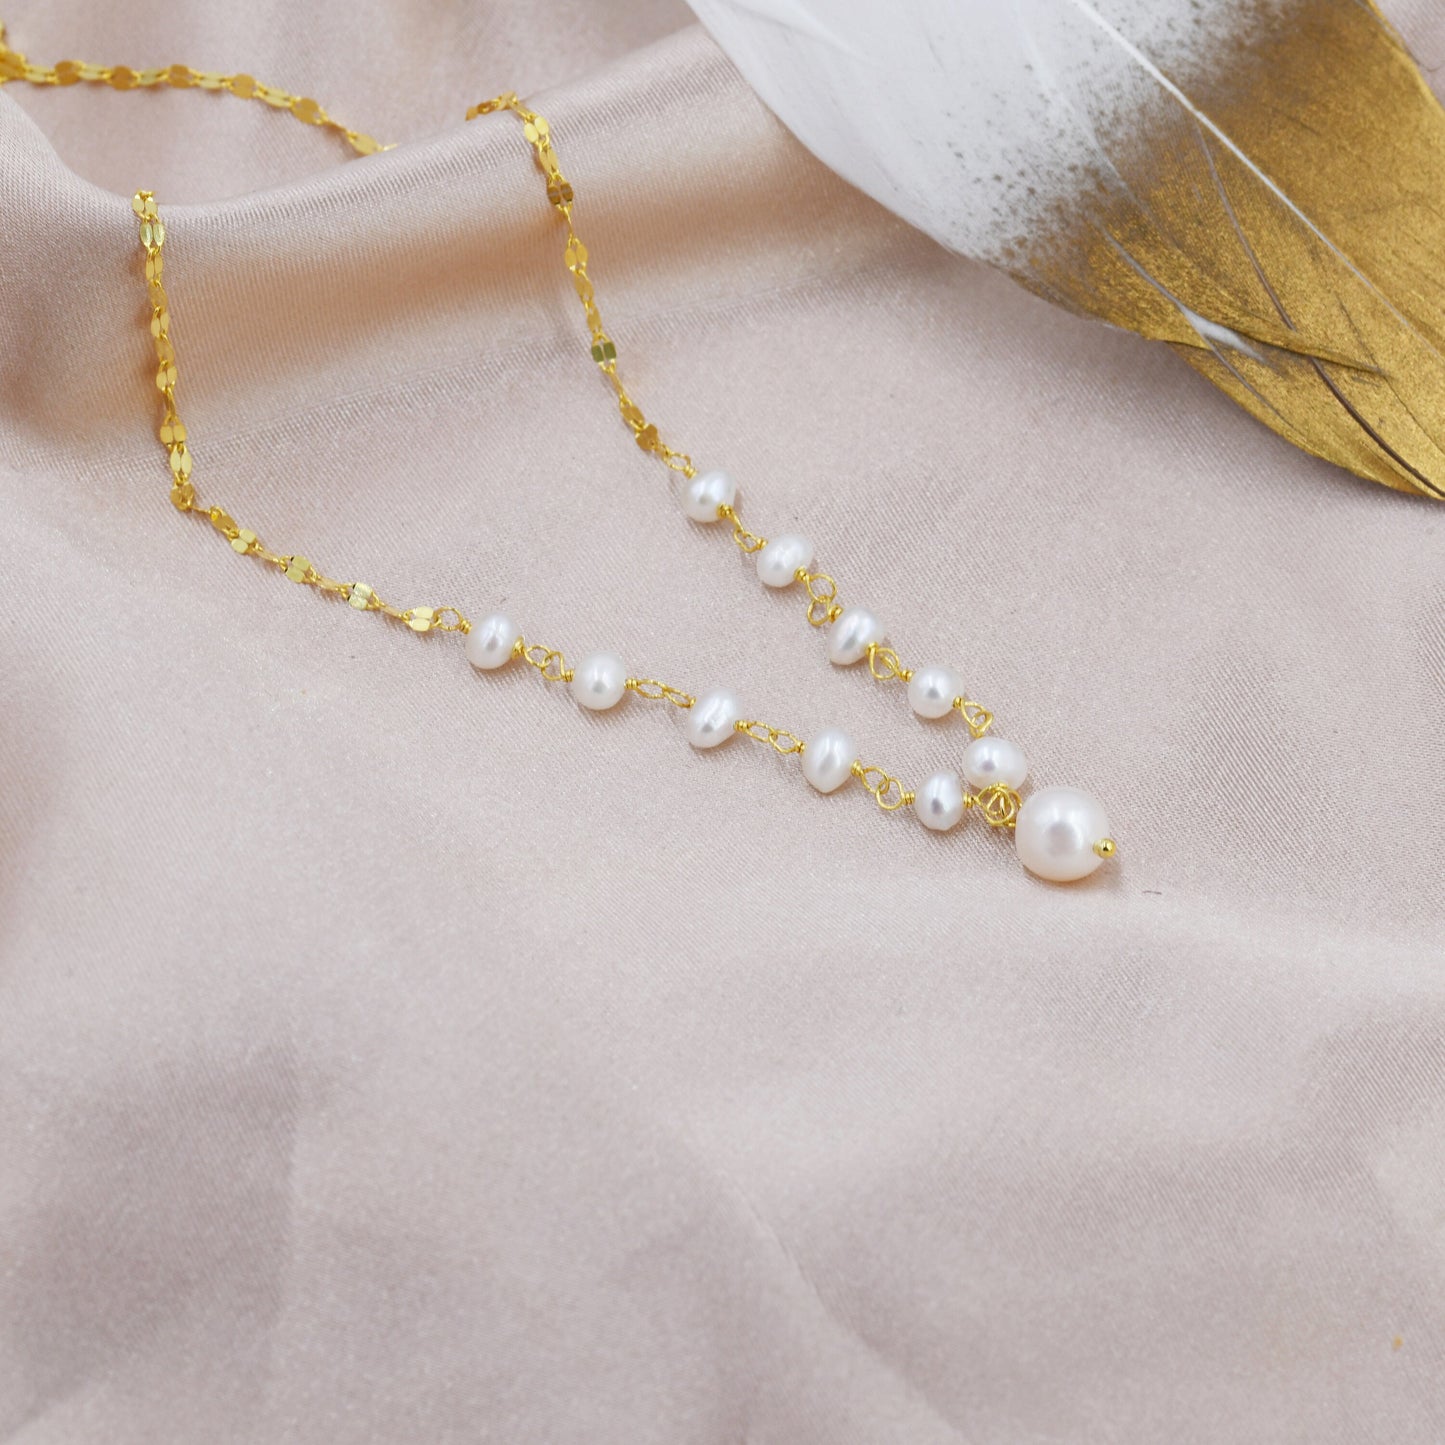 Genuine Pearl Beaded Necklace in Sterling Silver, Silver or Gold , Genuine Freshwater Pearls, Pearl Necklace, Y Necklace